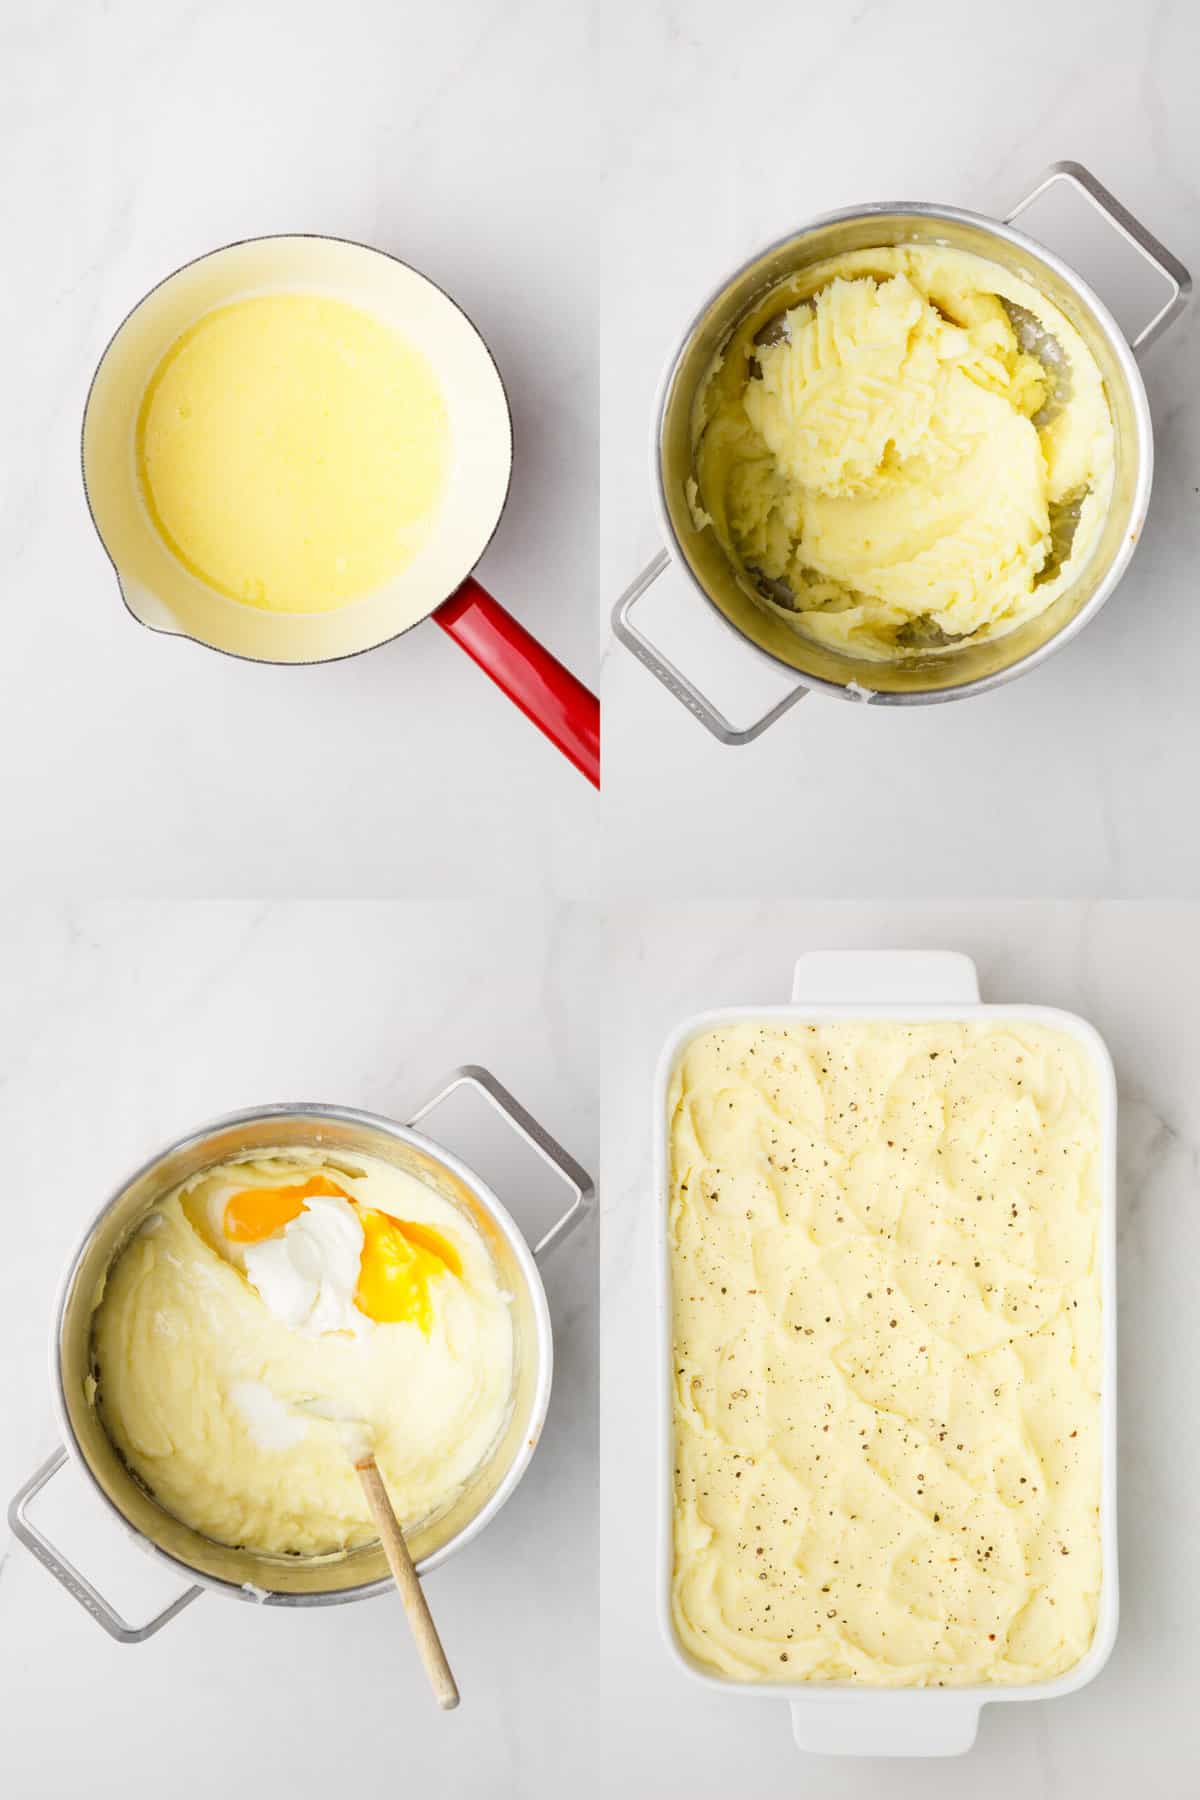 In-process steps for making the Shepherd's Pie topping.